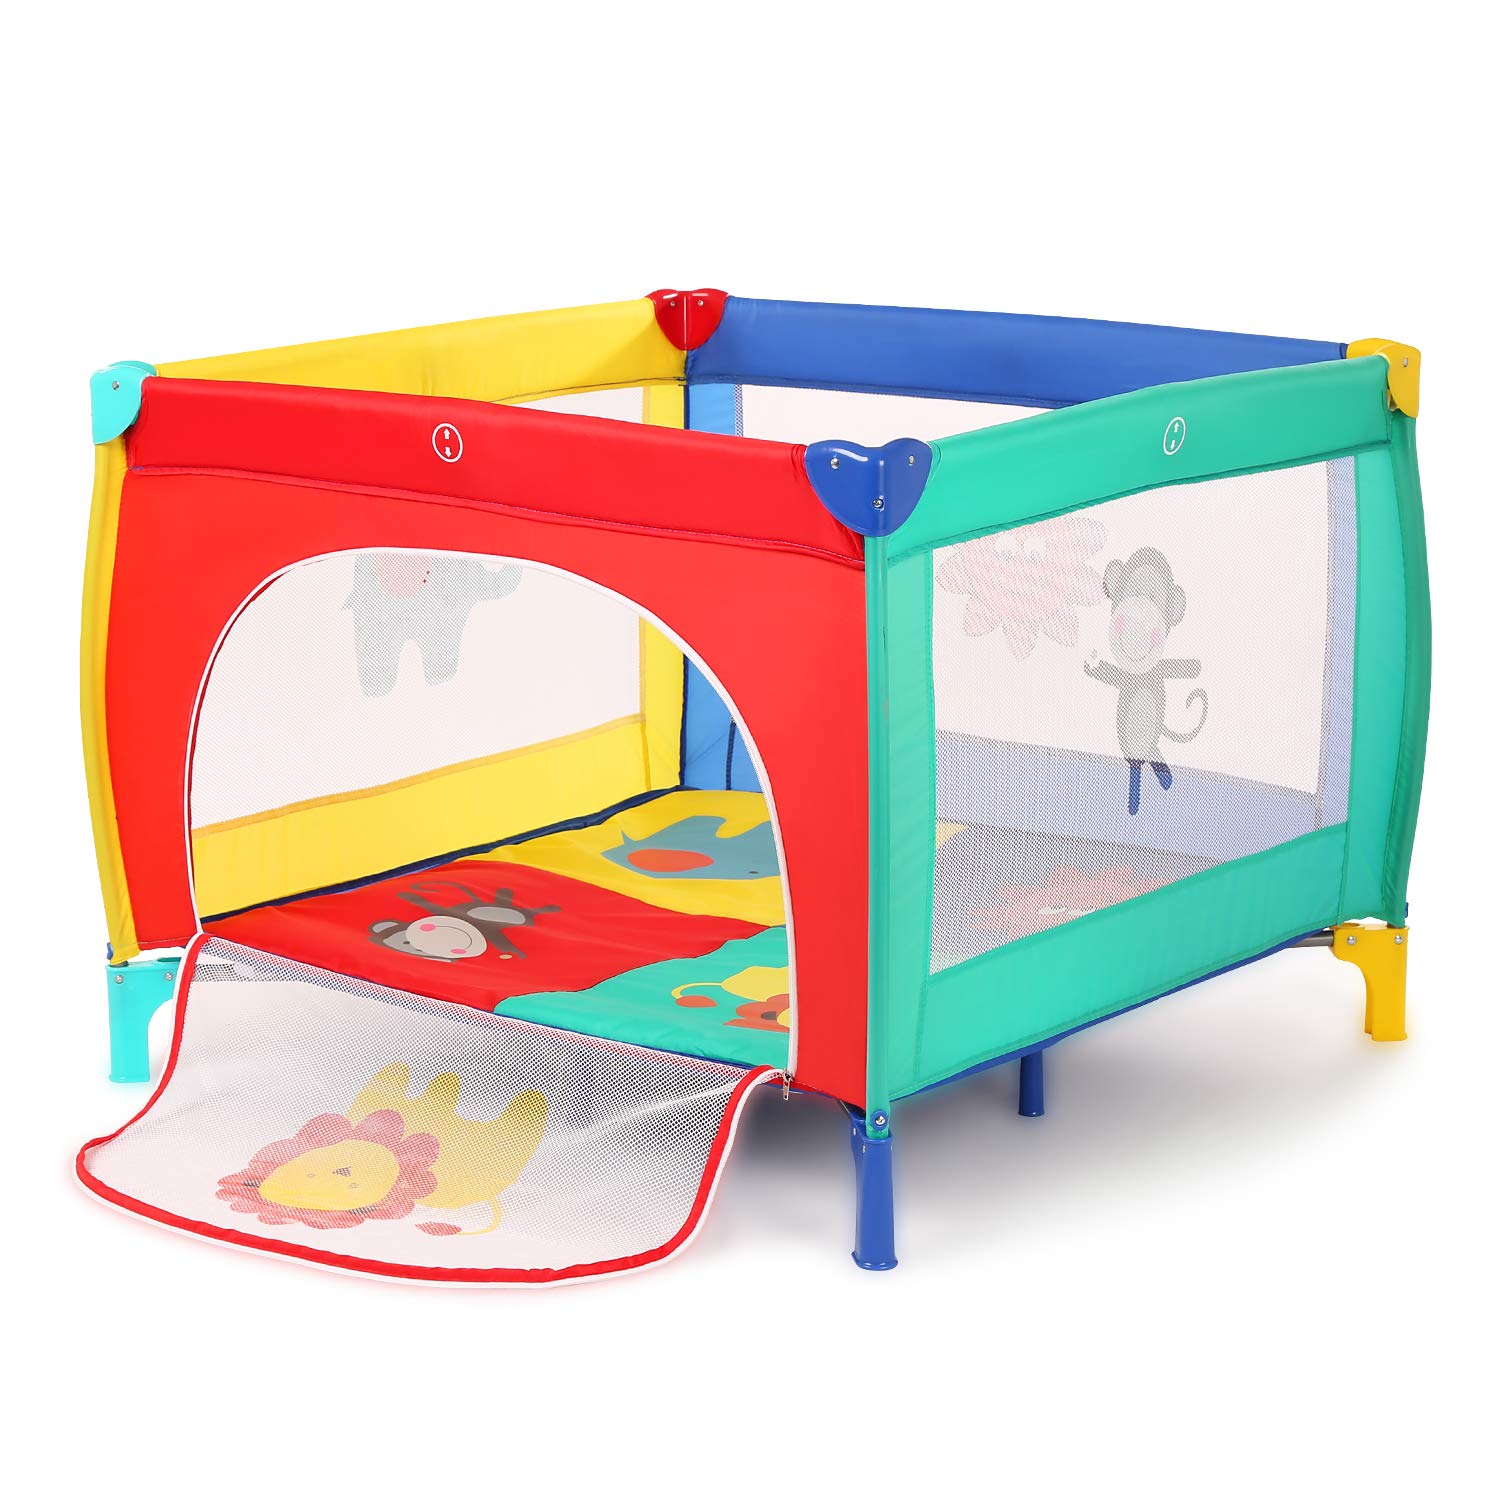 Kinbor Baby Play Portable Playard Play Pen with Mattress Safety Baby Playard with Door Activity Center for Toddler Boys Girls Fun Time 39inch x 39inch 